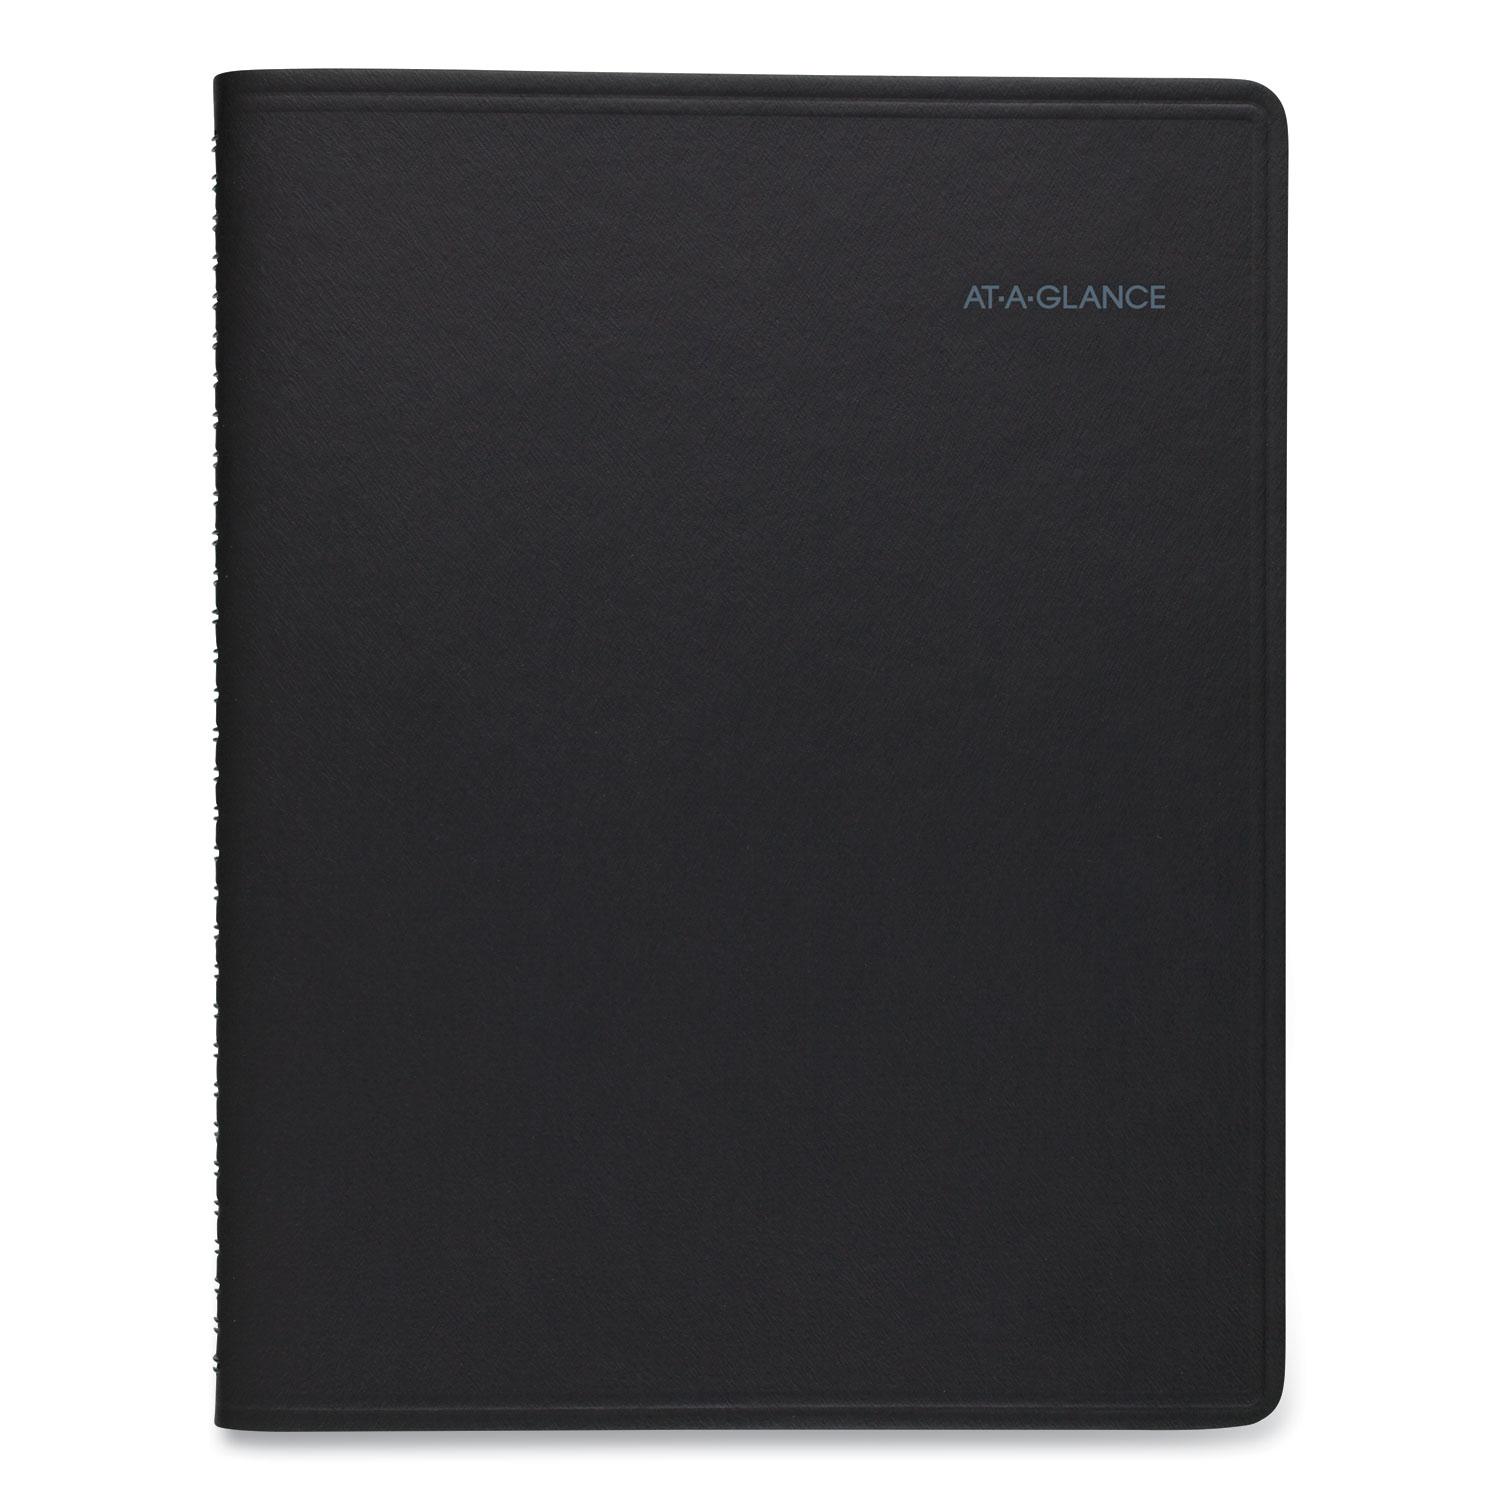  AT-A-GLANCE 760605 QuickNotes Monthly Planner, 10 7/8 x 8 1/4, Black, 2020 (AAG760605) 